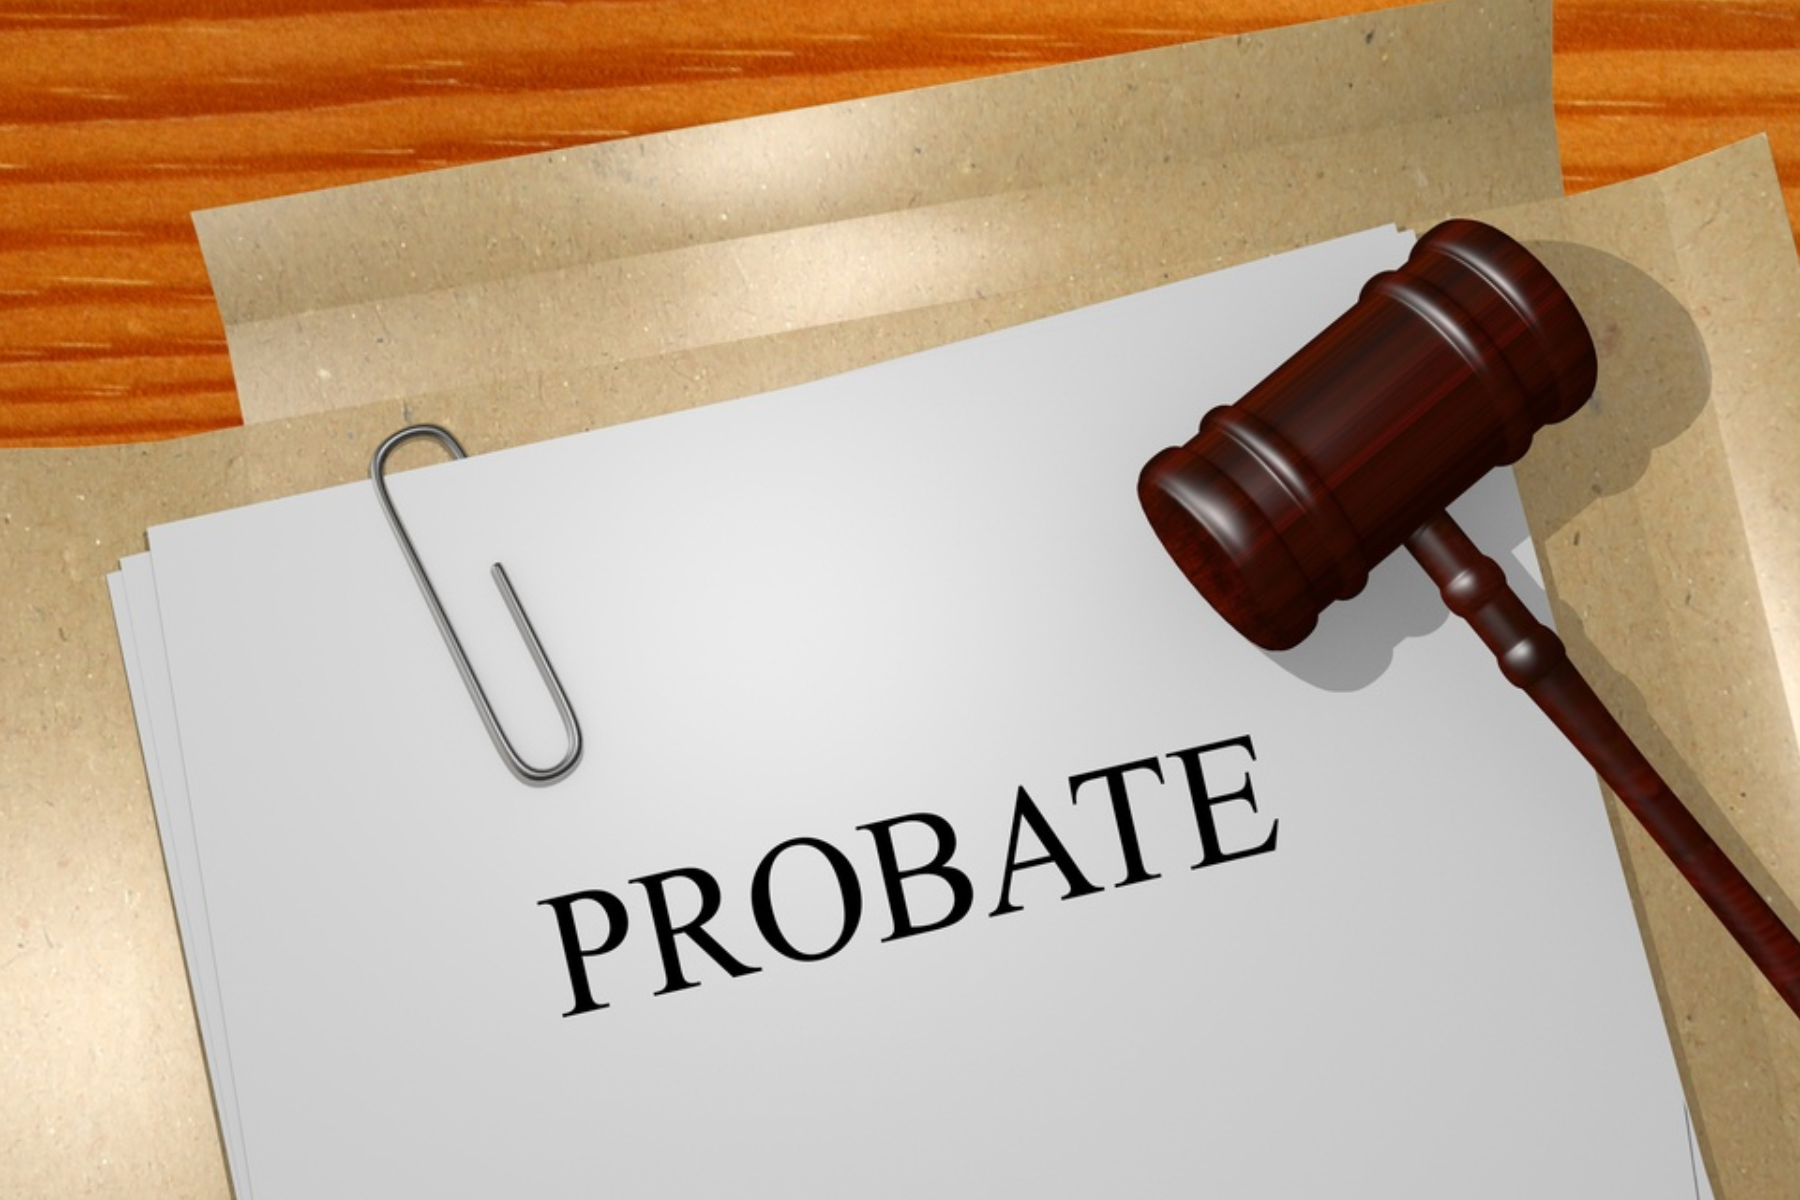 A piece of paper with the word "PROBATE" and a gavel on top